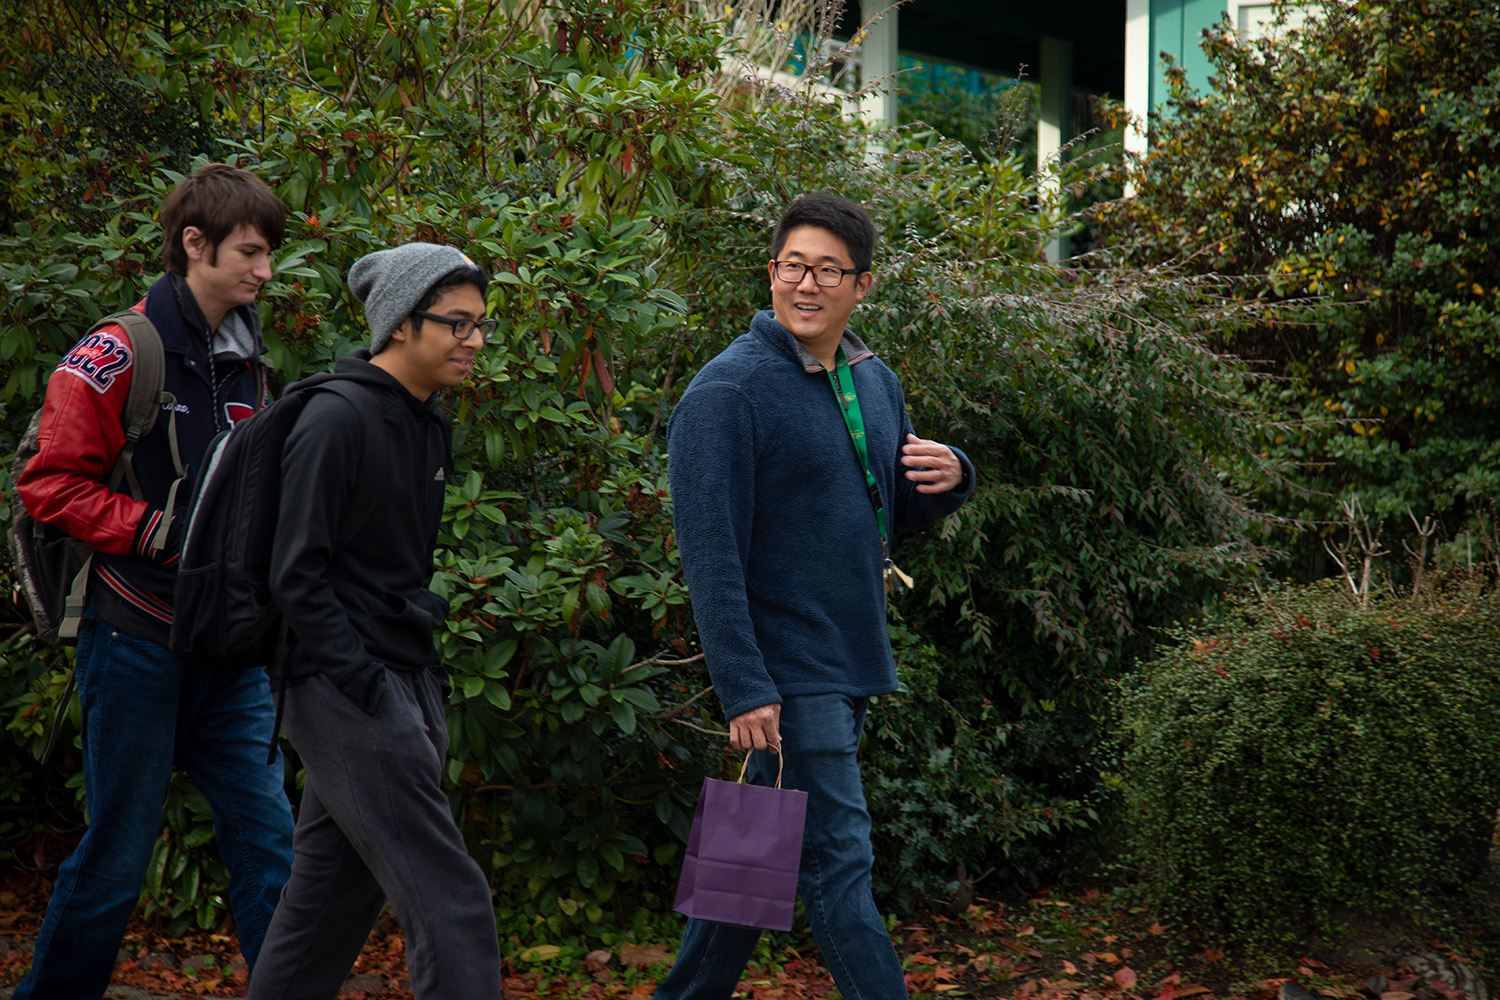 Assistant Professor Seung-Jin Lee talks to two students. The three are walking down a sidewalk. Lee is wearing a dark colored jacket, blue jeans and has short black hair and glasses. The student closest to him is wearing a grey beenie, a dark colored jacket and jeans. The student next to him is wearing a red and gray coat and blue jeans. He has short, brown hair. In the background are different trees and bushes.